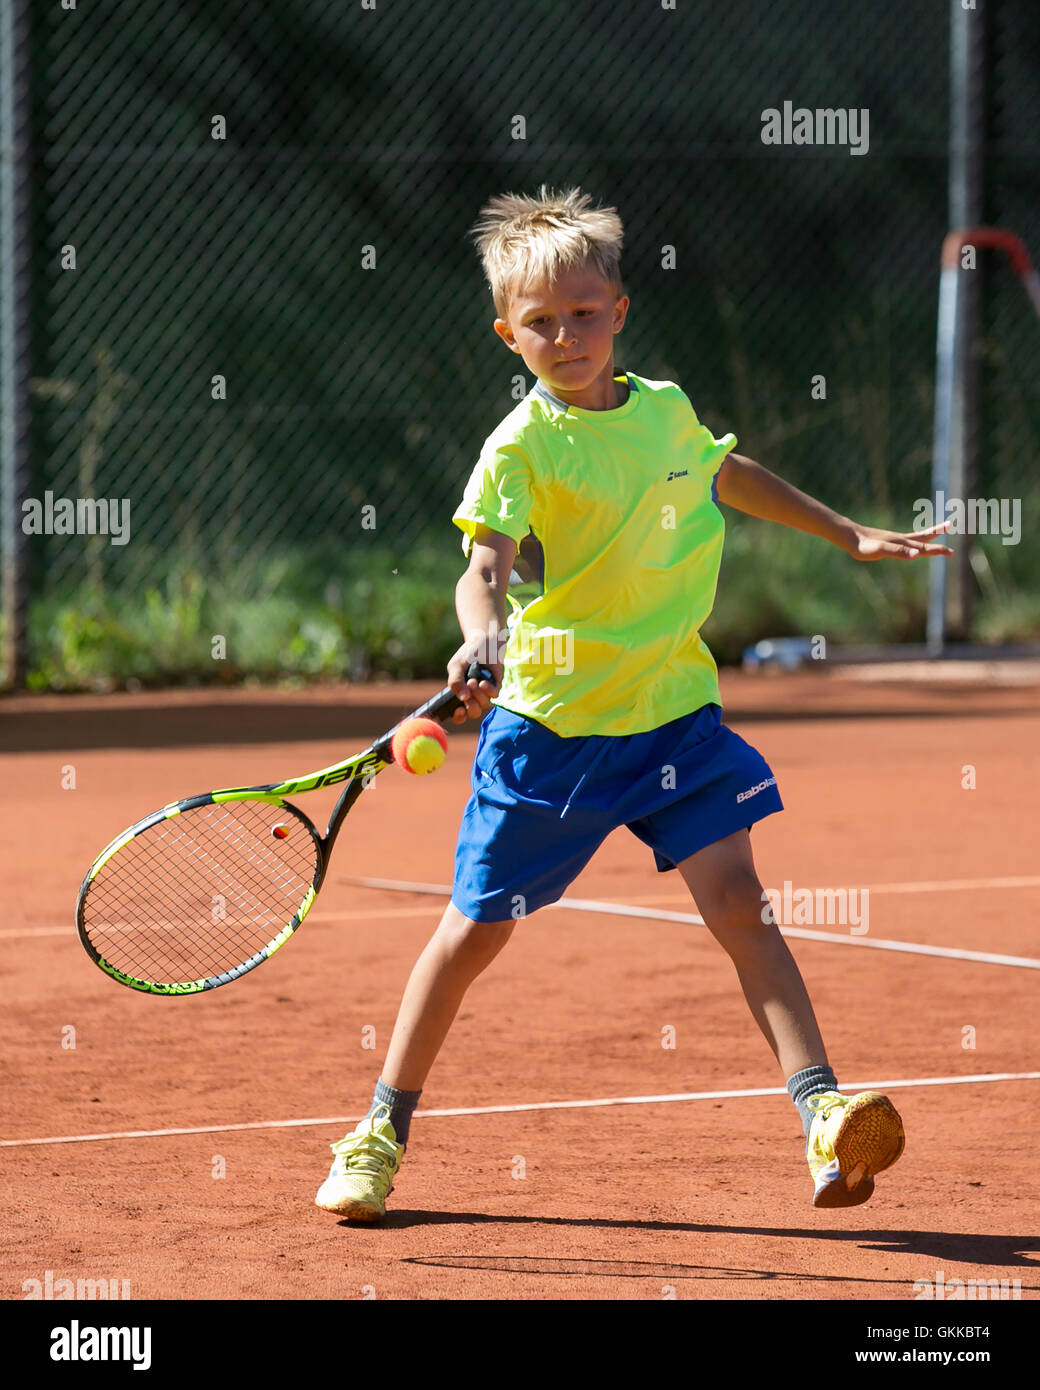 Young boy playing tennis Stock Photo - Alamy